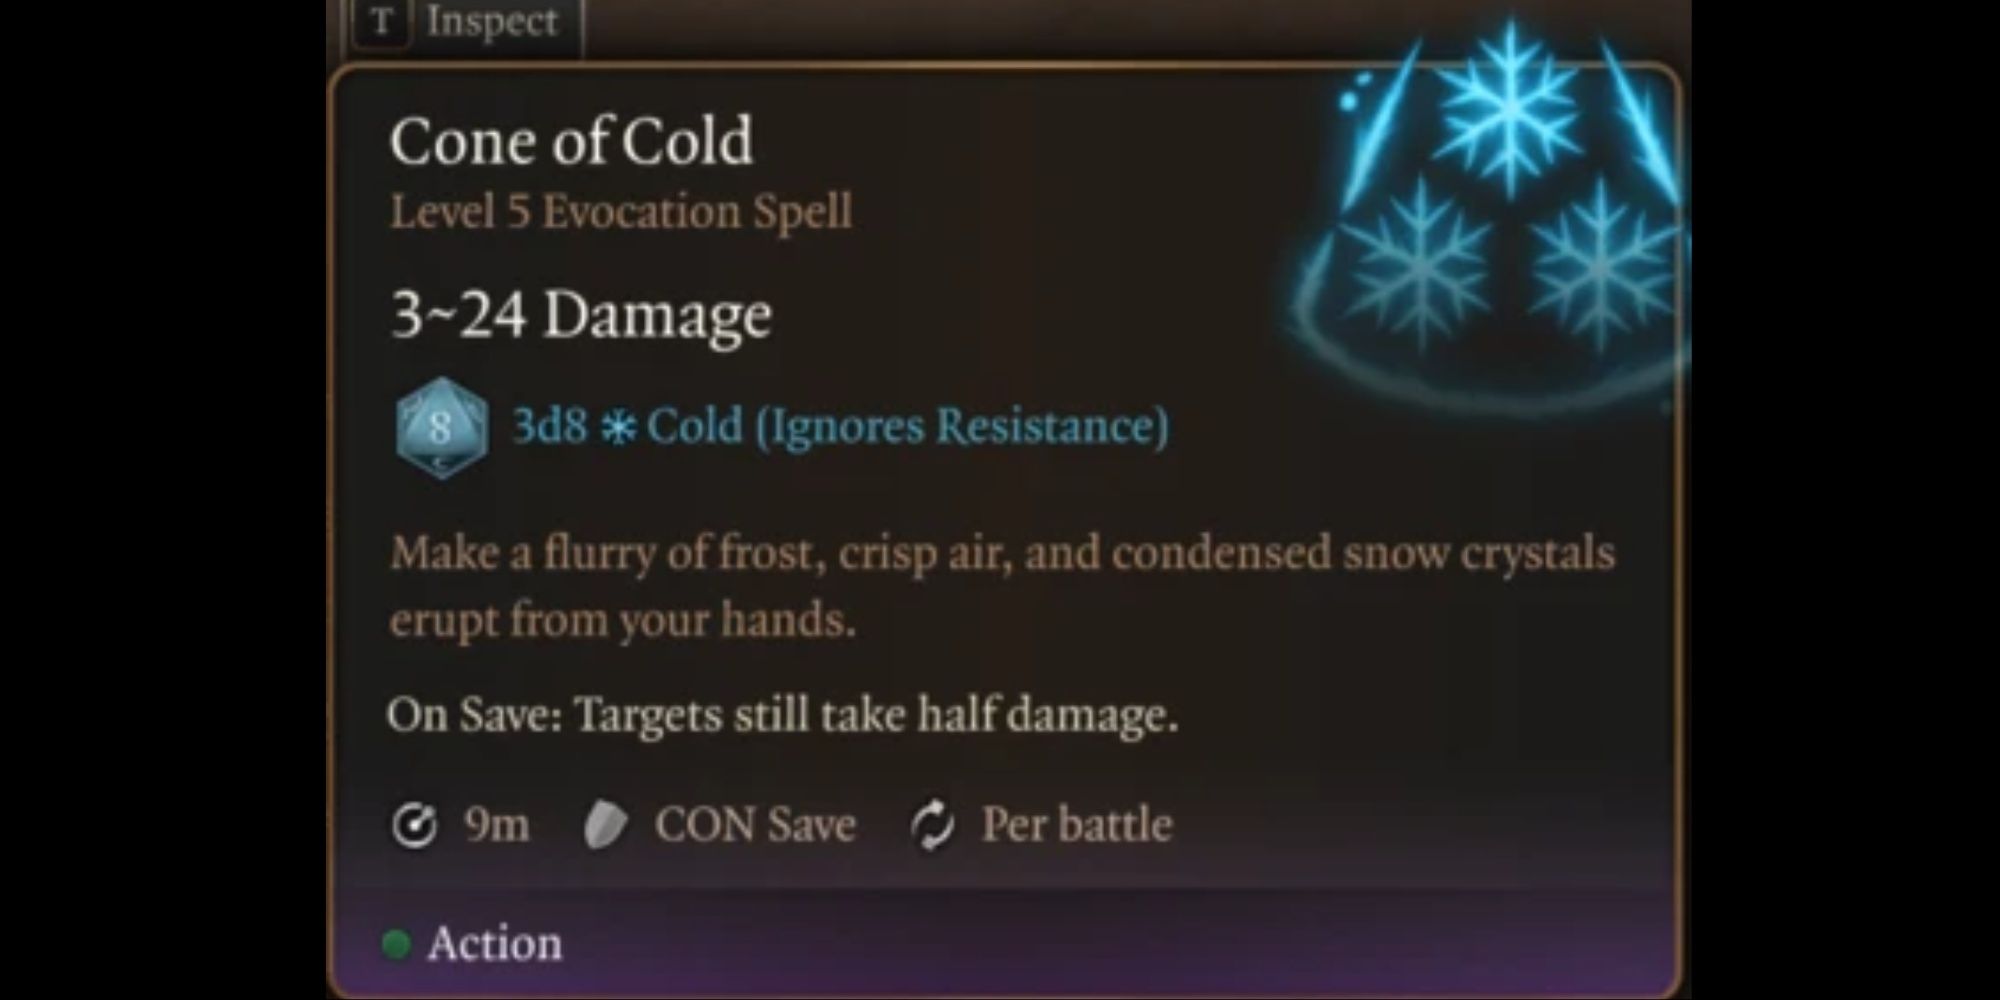 Cone of Cold bg3 spell